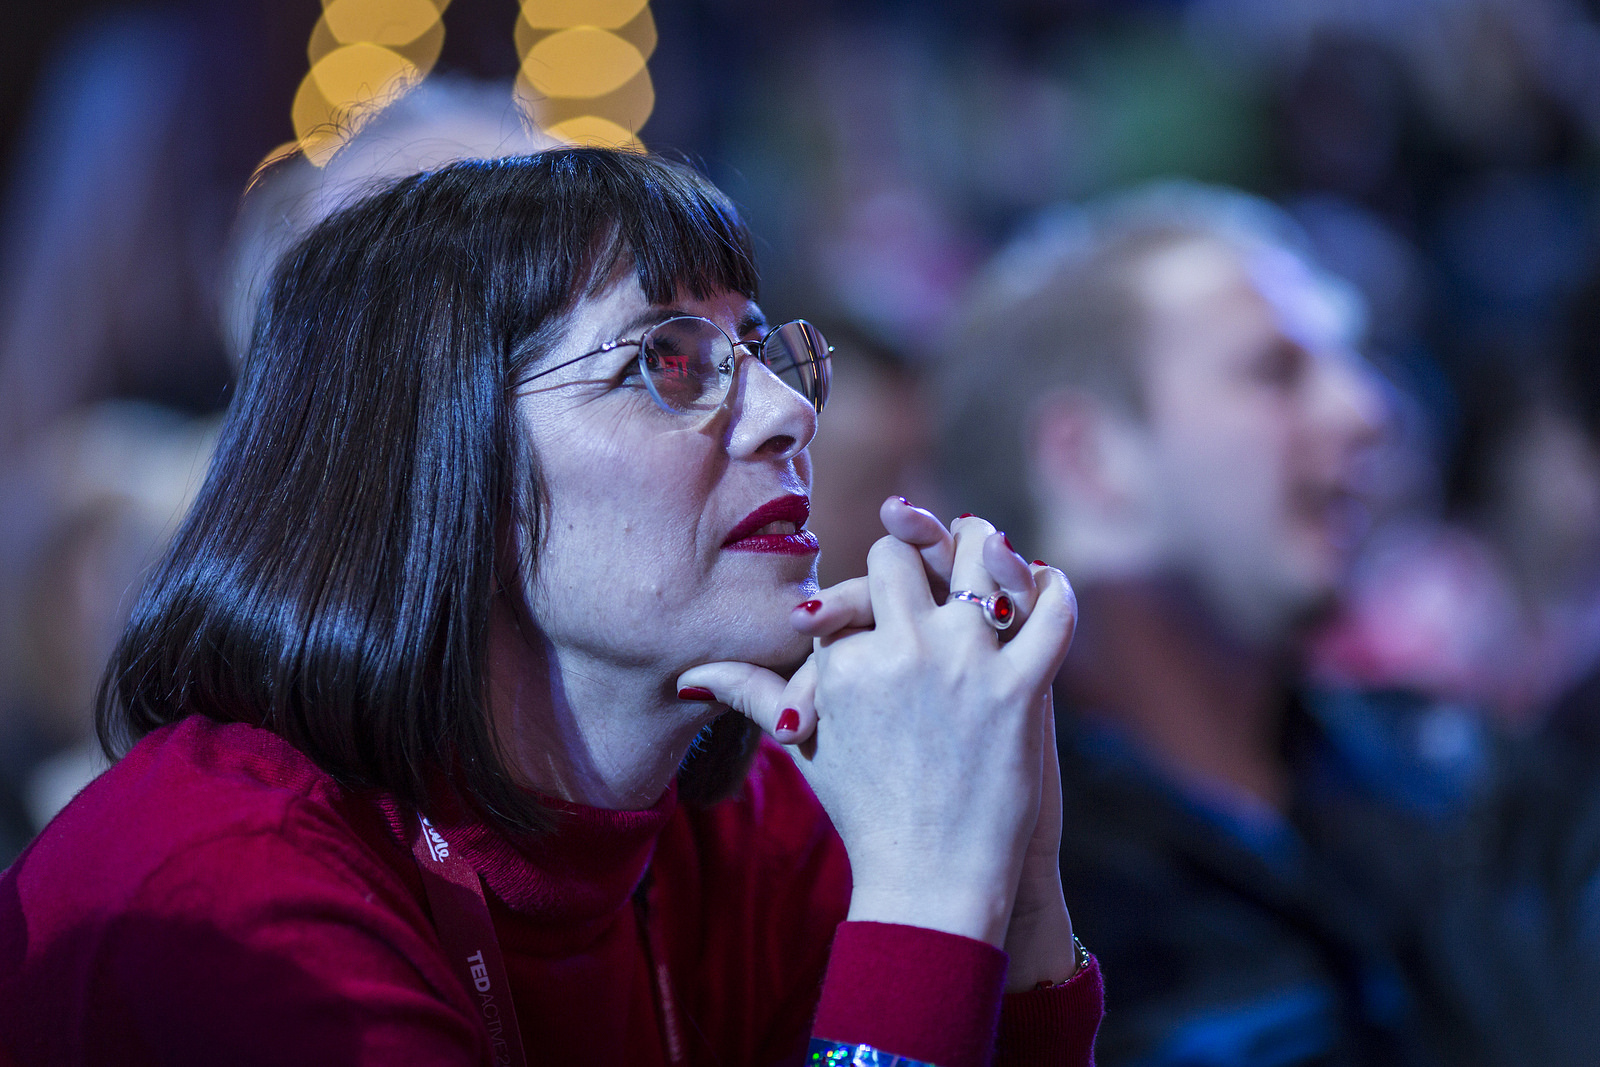 A TEDx organizer is entranced watching a speaker rehearsal. Photo: